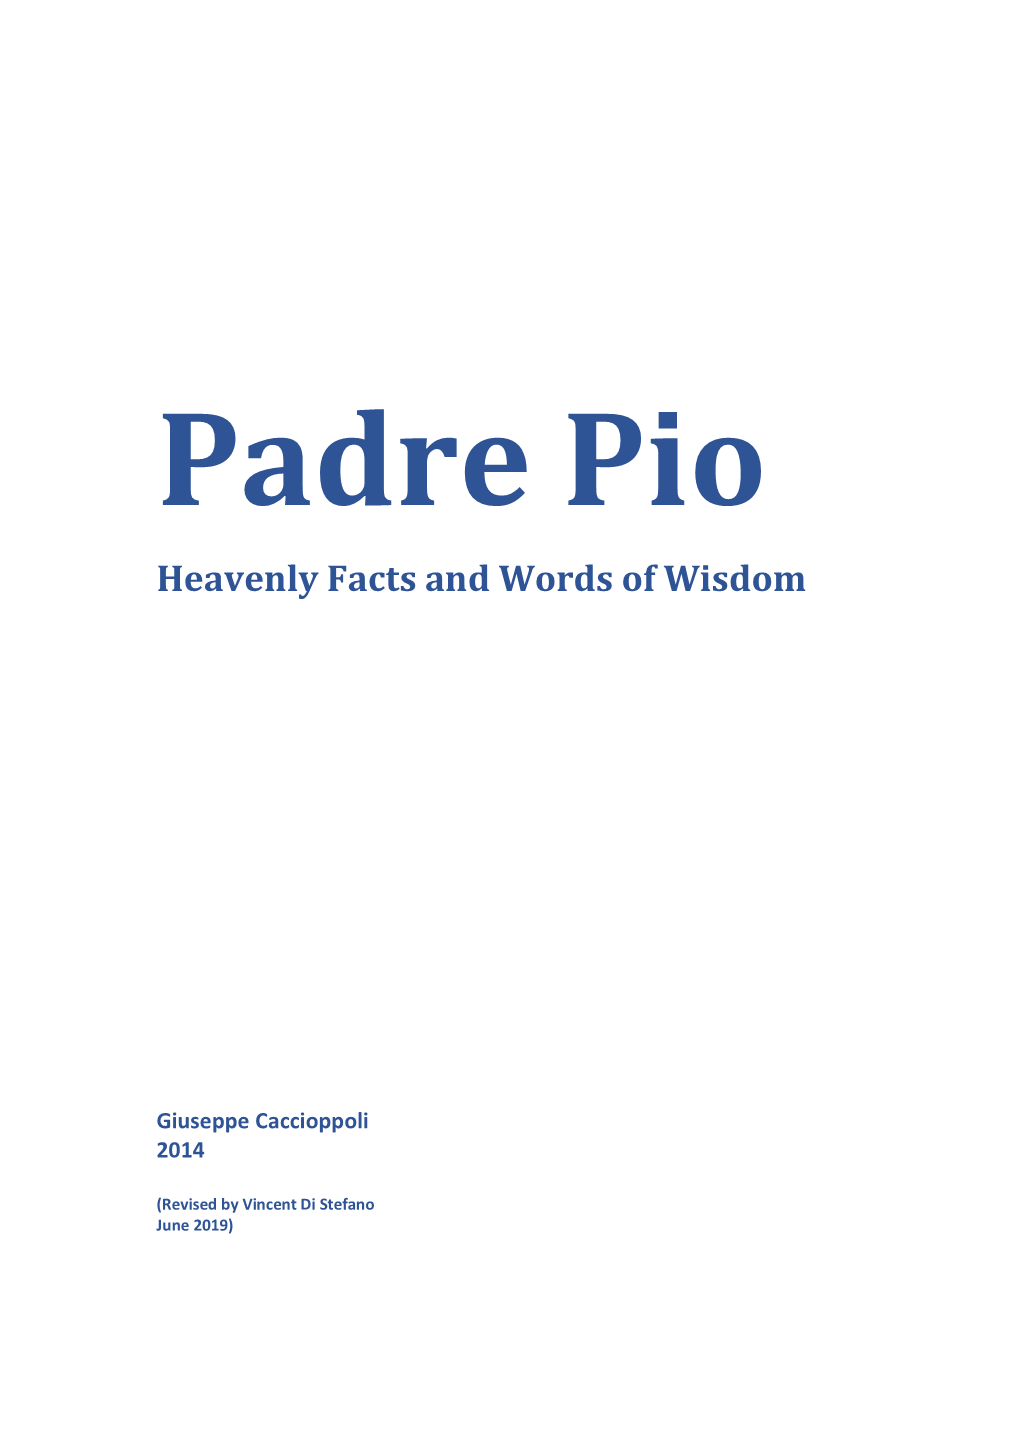 Padre Pio. Heavenly Facts and Words of Wisdom.Pdf